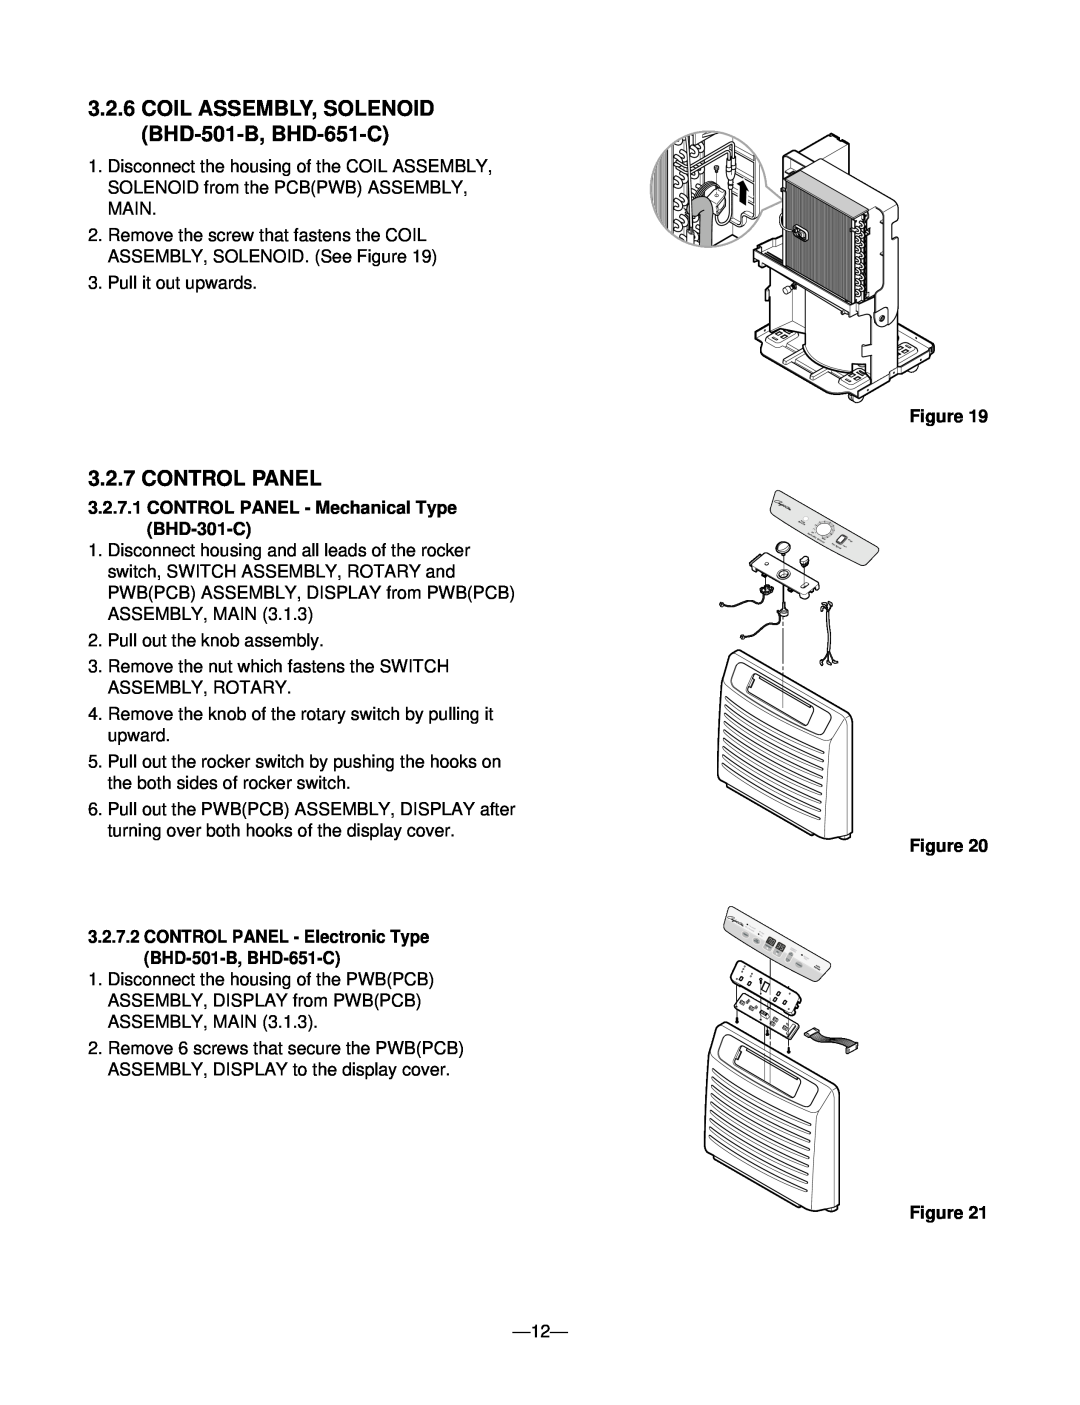 Heat Controller BHD-301-C service manual 3.2.6COIL ASSEMBLY, SOLENOID BHD-501-B, BHD-651-C, Control Panel, Figure Figure 